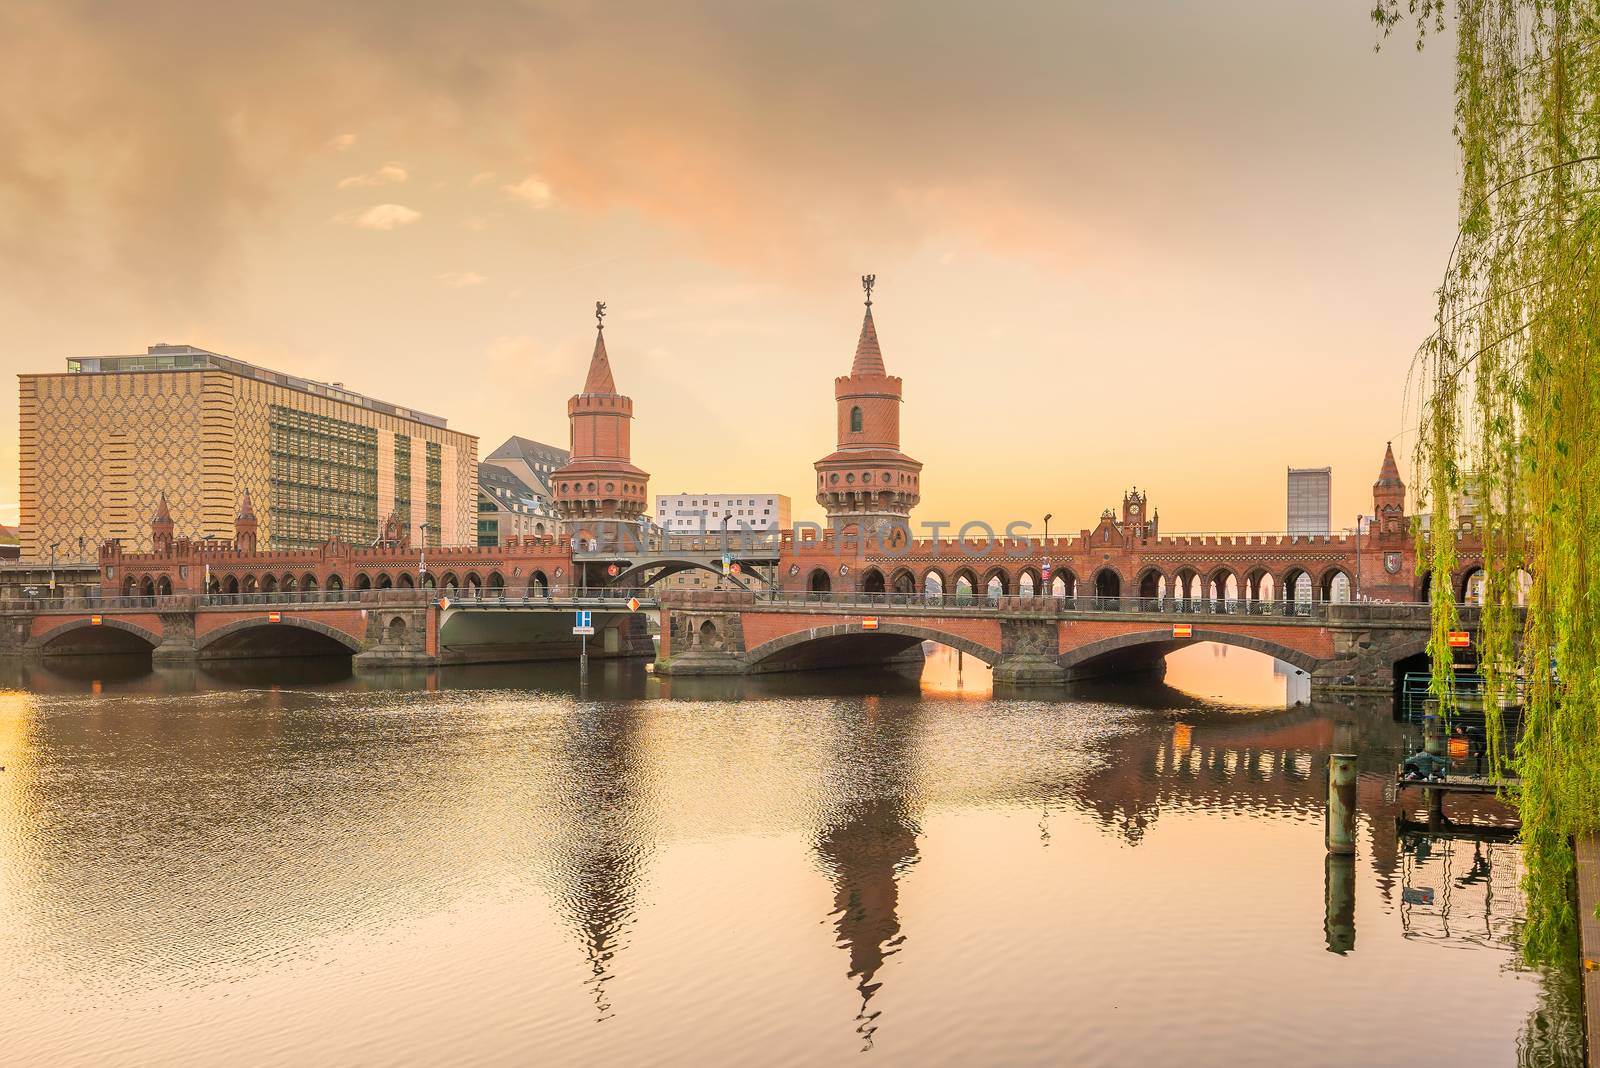 Berlin skyline with Oberbaum Bridge and Spree River, at sunrise, Germany